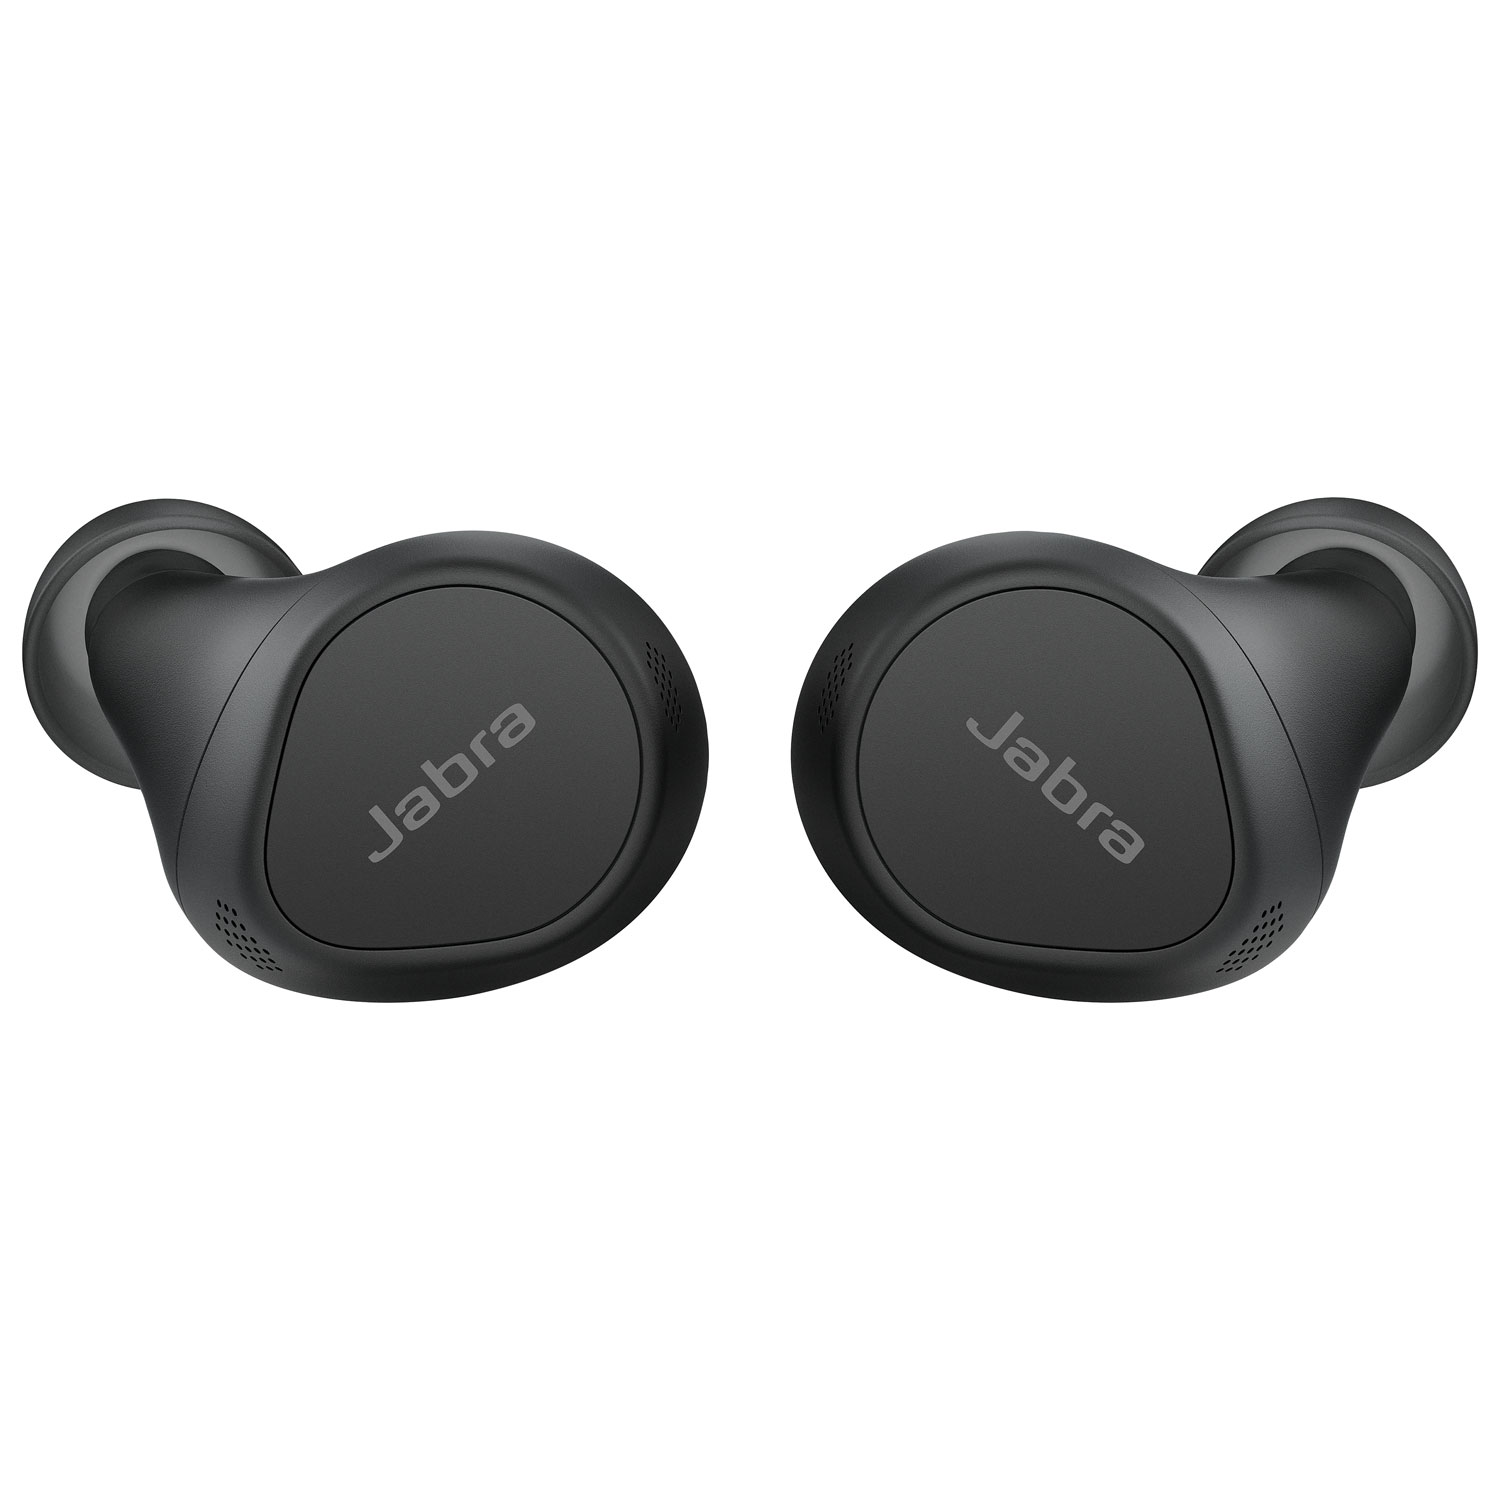 Jabra Elite 7 Pro In-Ear Noise Cancelling Truly Wireless Headphones - Black - Only at Best Buy